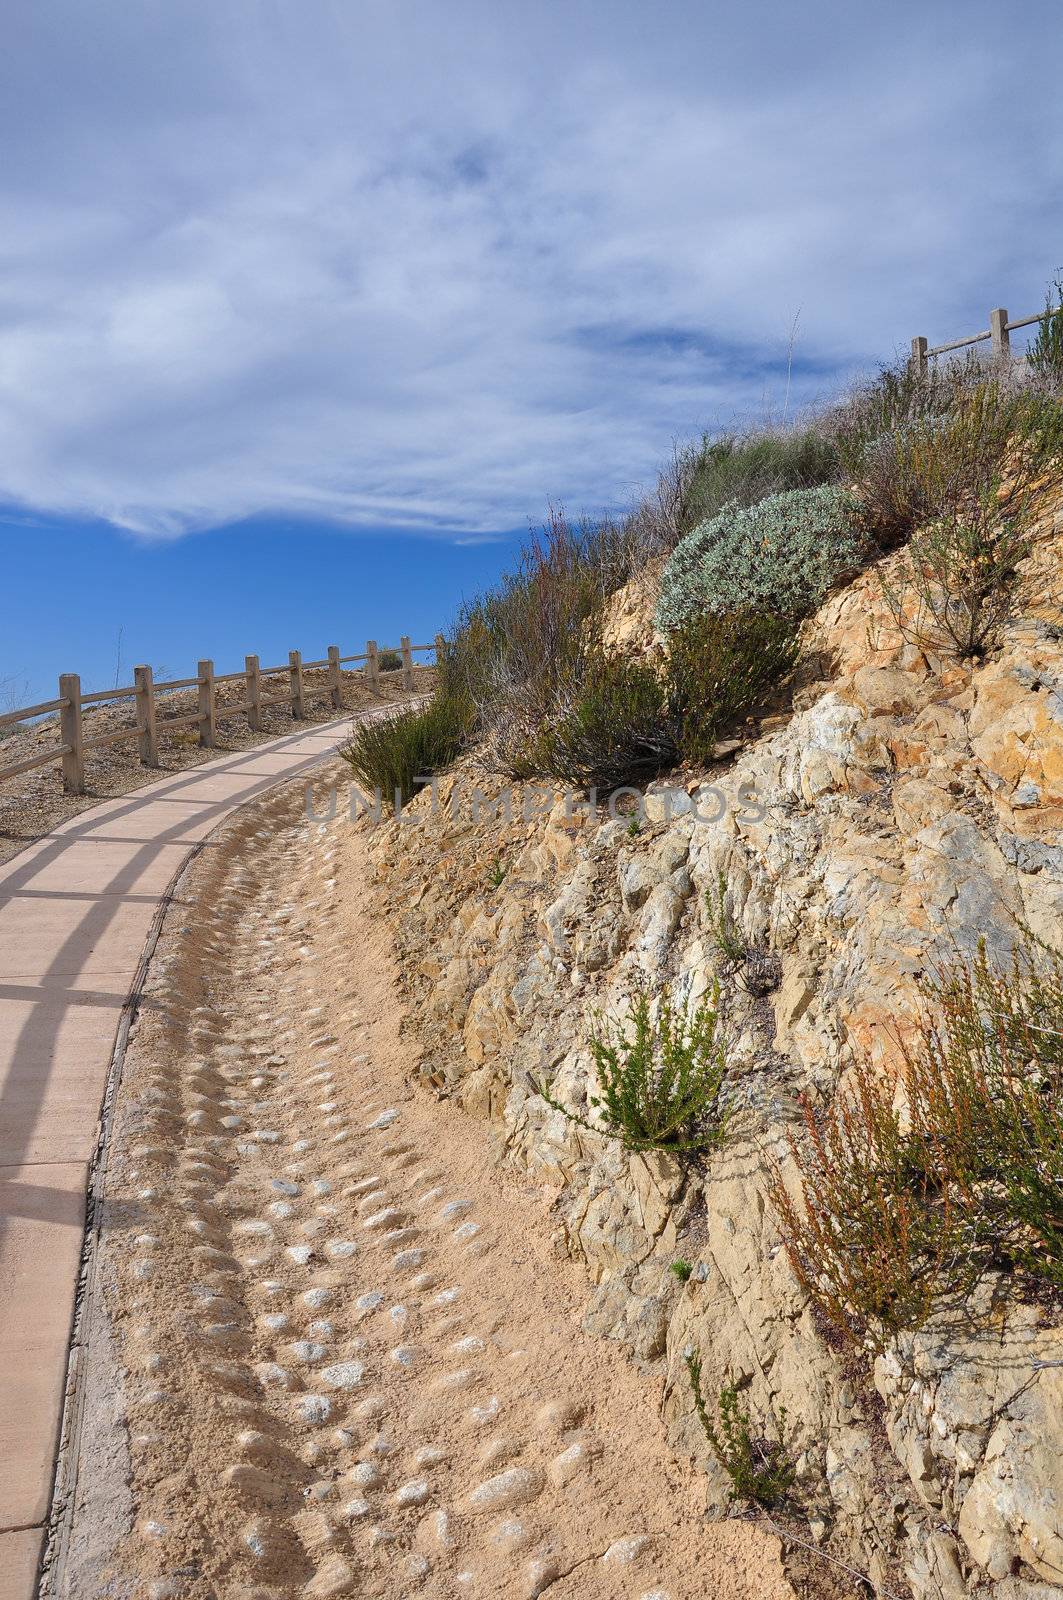 View of a pathway which leads to a scenic overlook in Hemet, California.